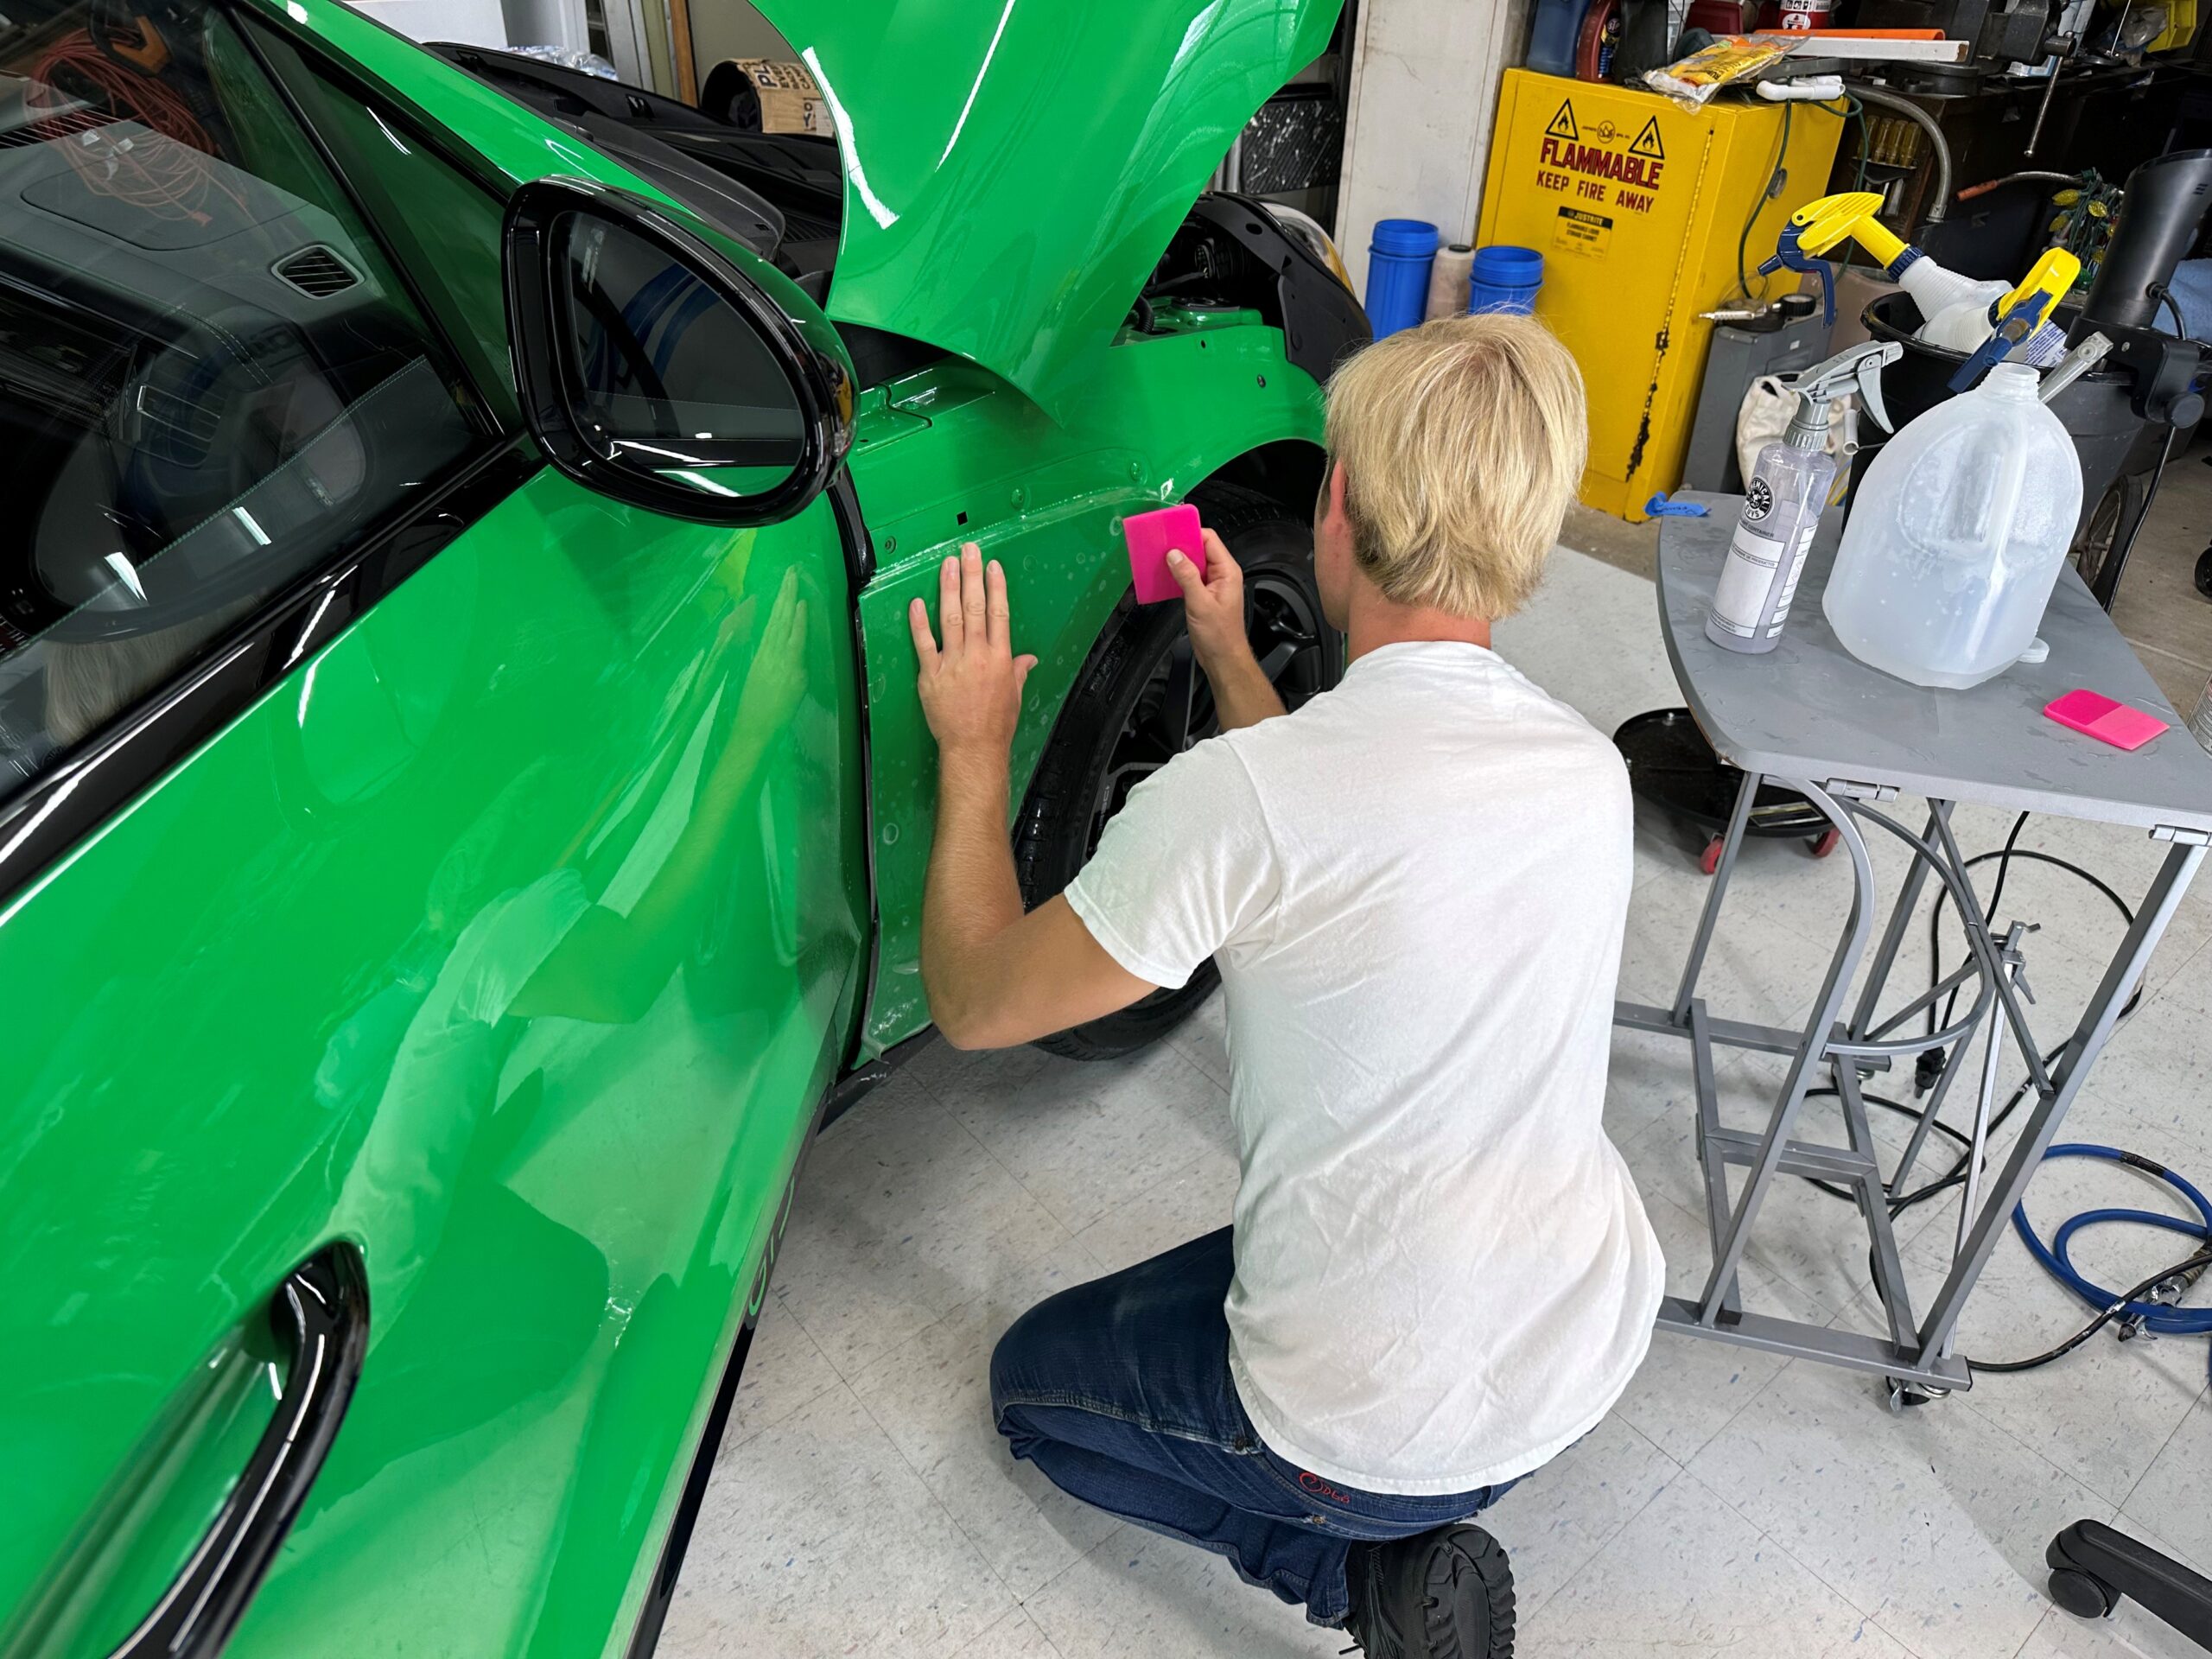 Is ceramic coating for cars a good investment?